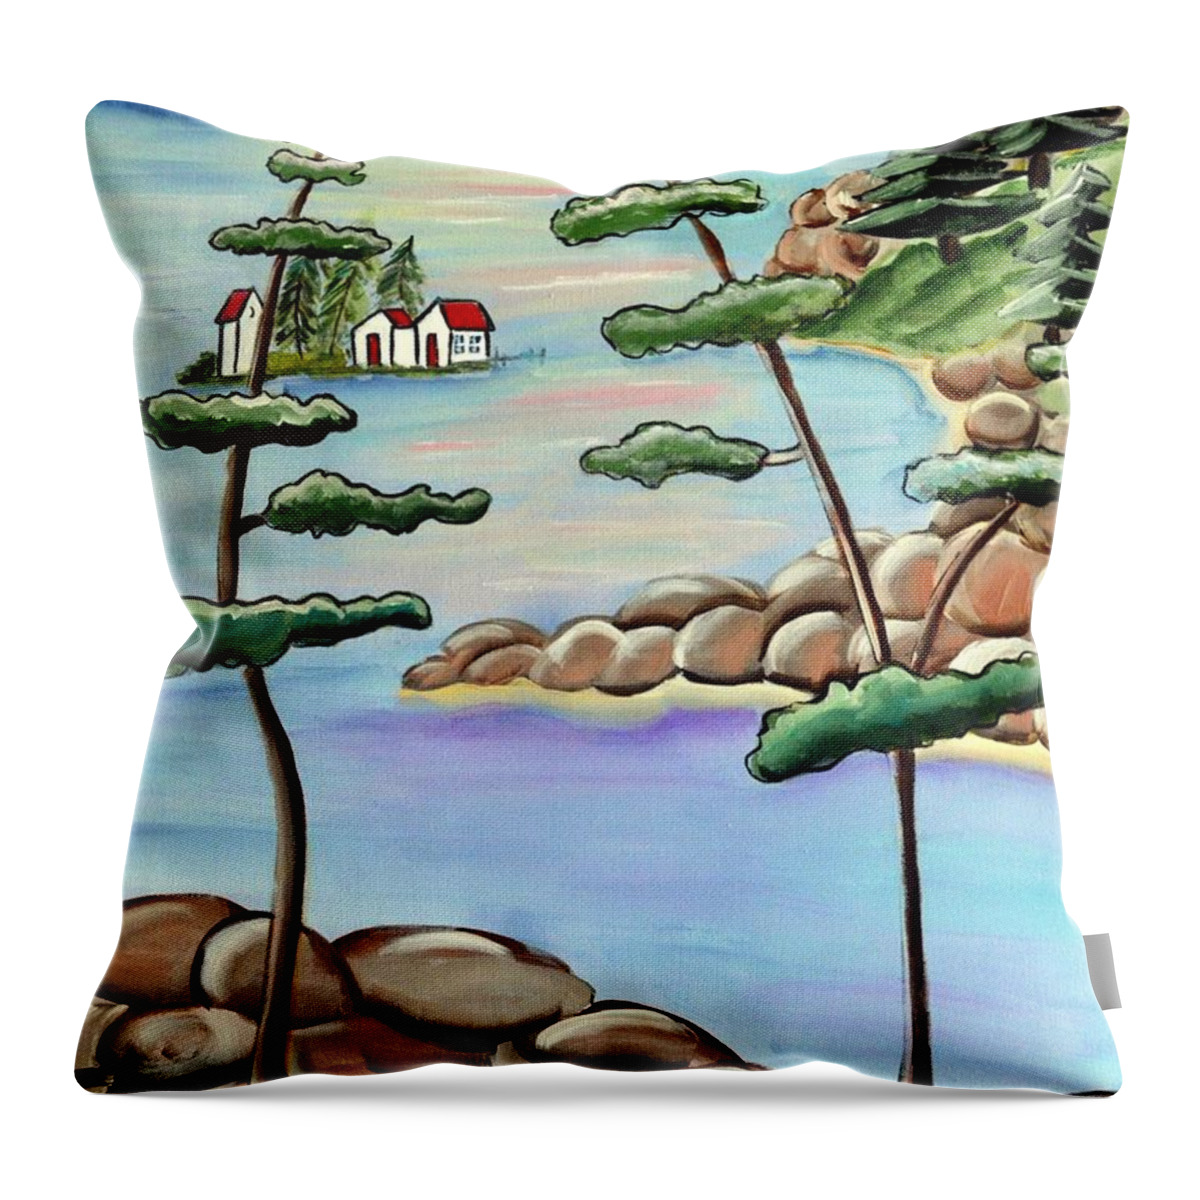 Abstracted Throw Pillow featuring the painting A Canadian Sunrise by Heather Lovat-Fraser